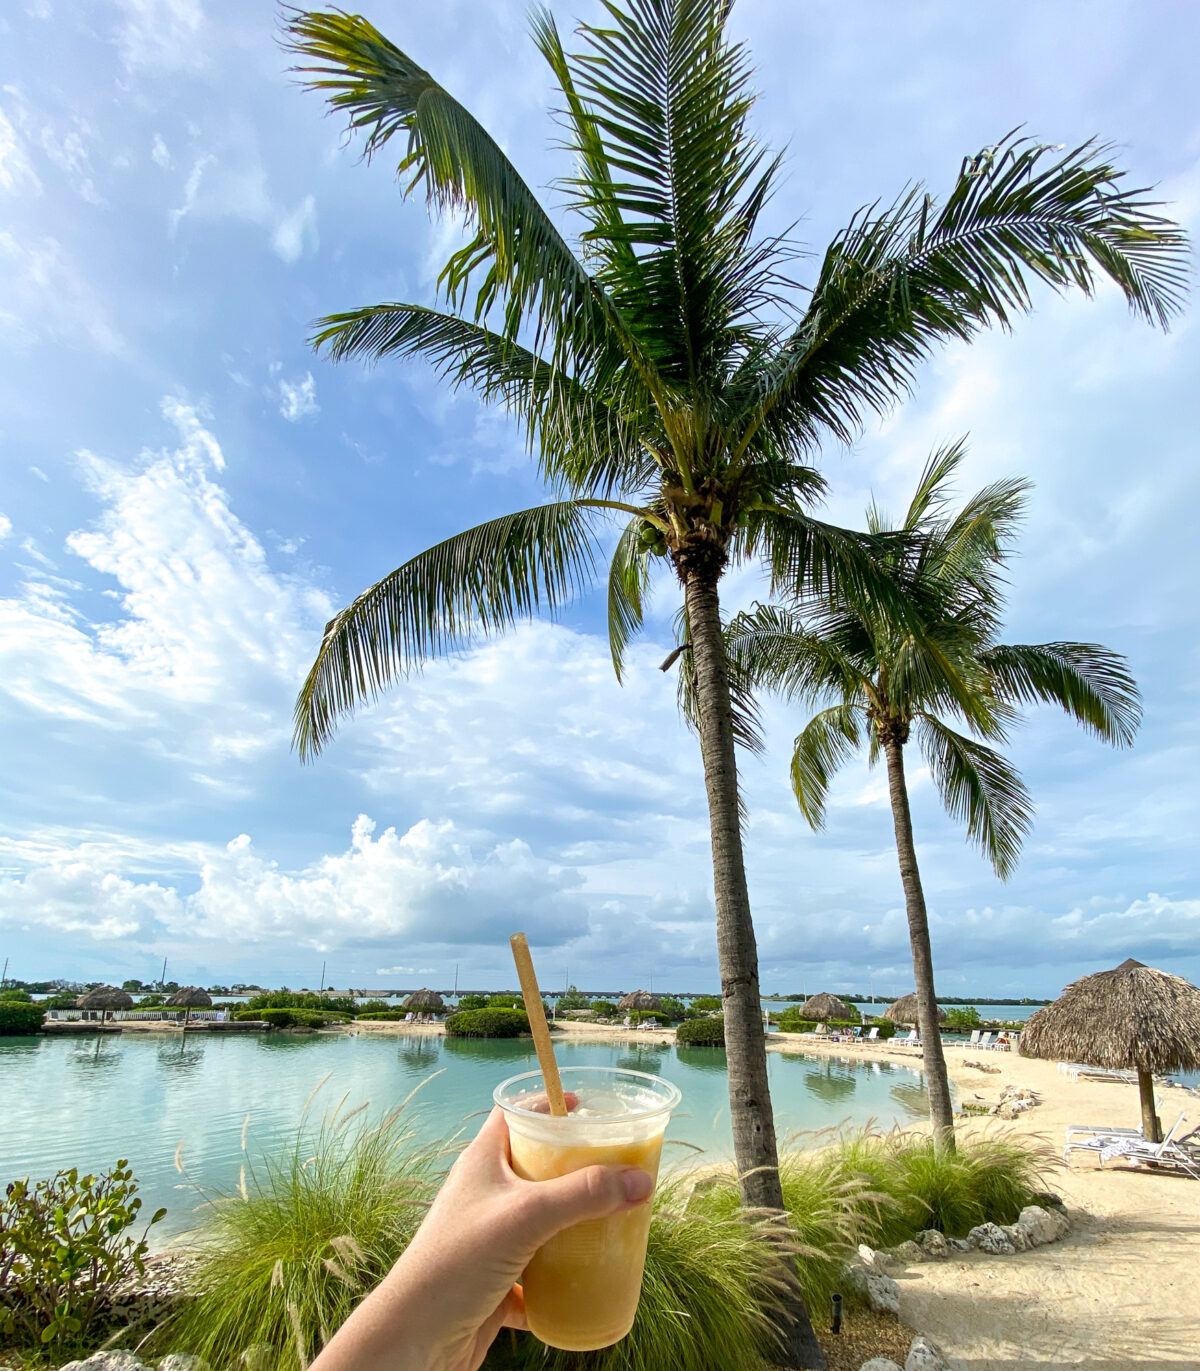 Piña colada from Tiki Grill at Hawks Cay Resort on Duck Key in Florida